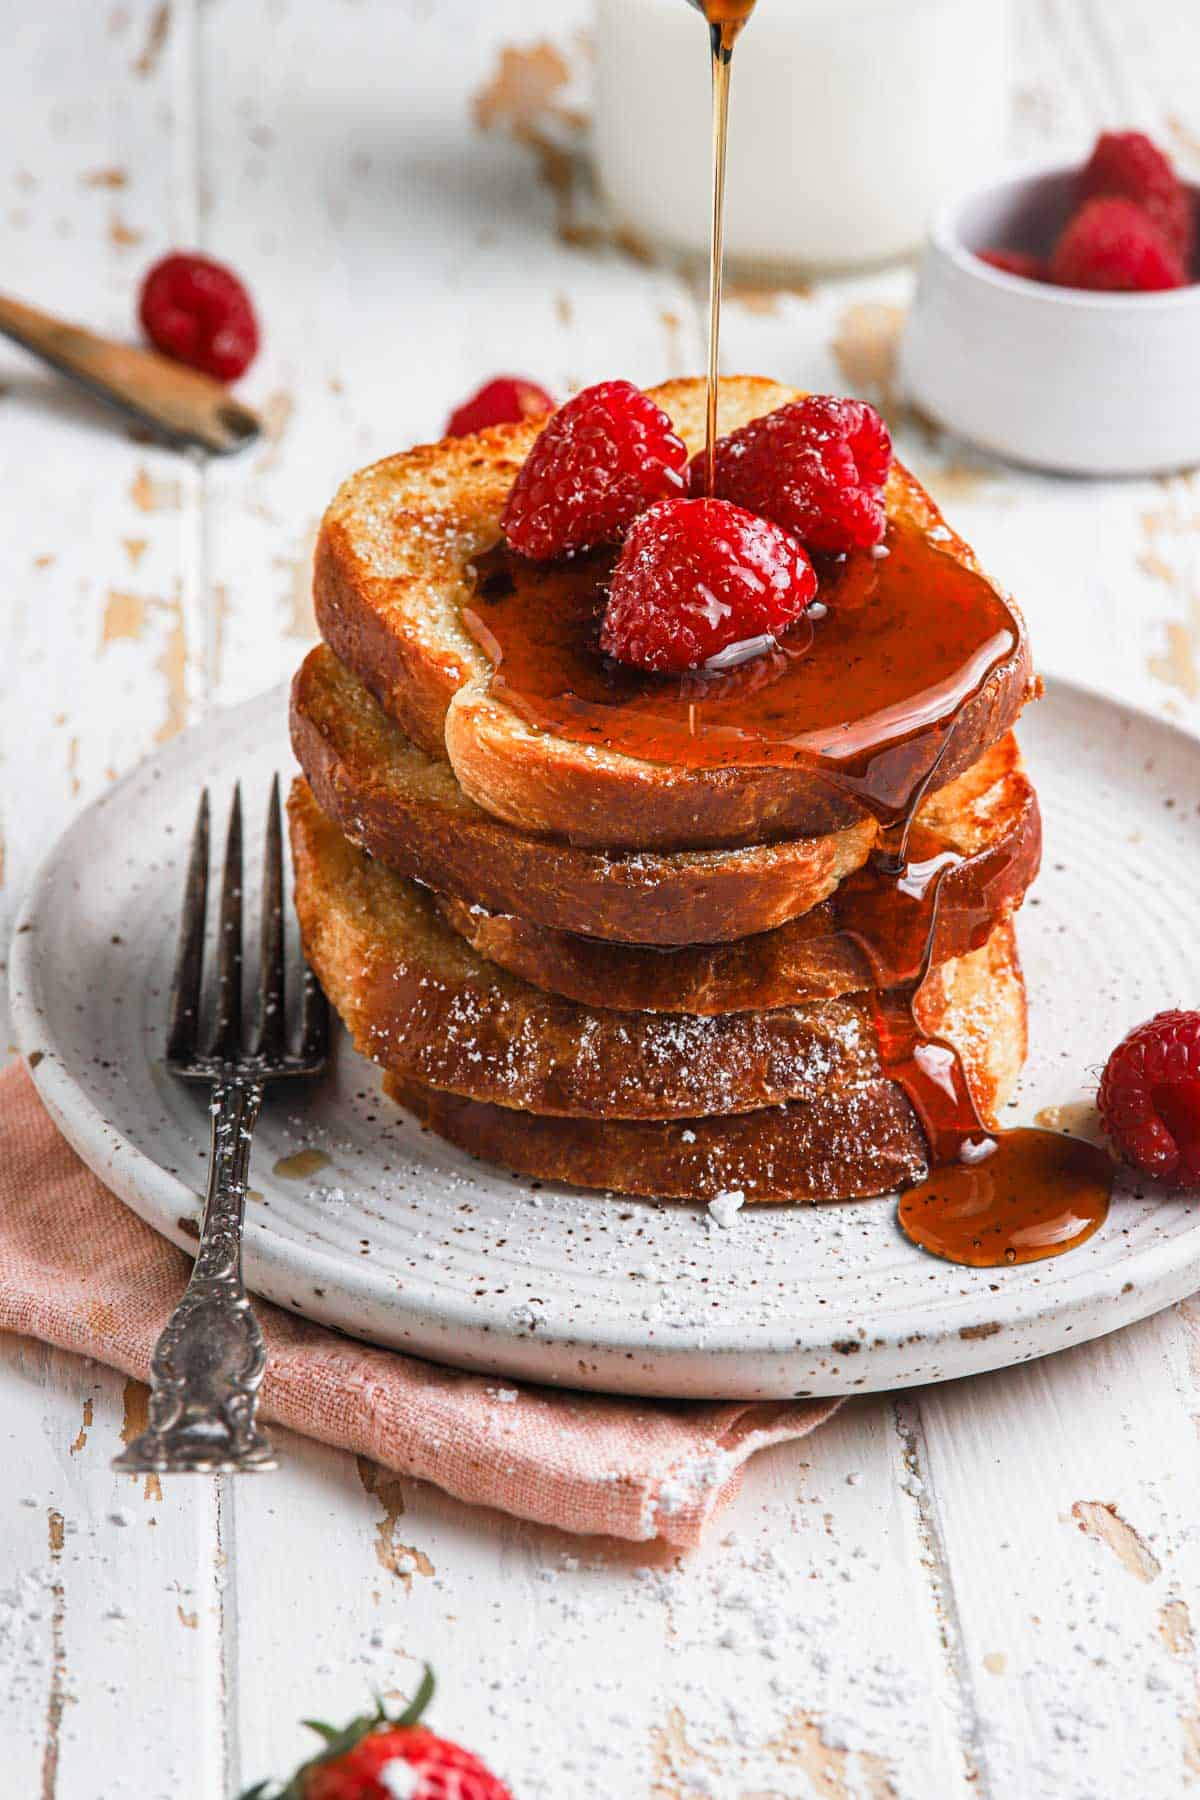 Brioche french toasts with berries and maple syrup